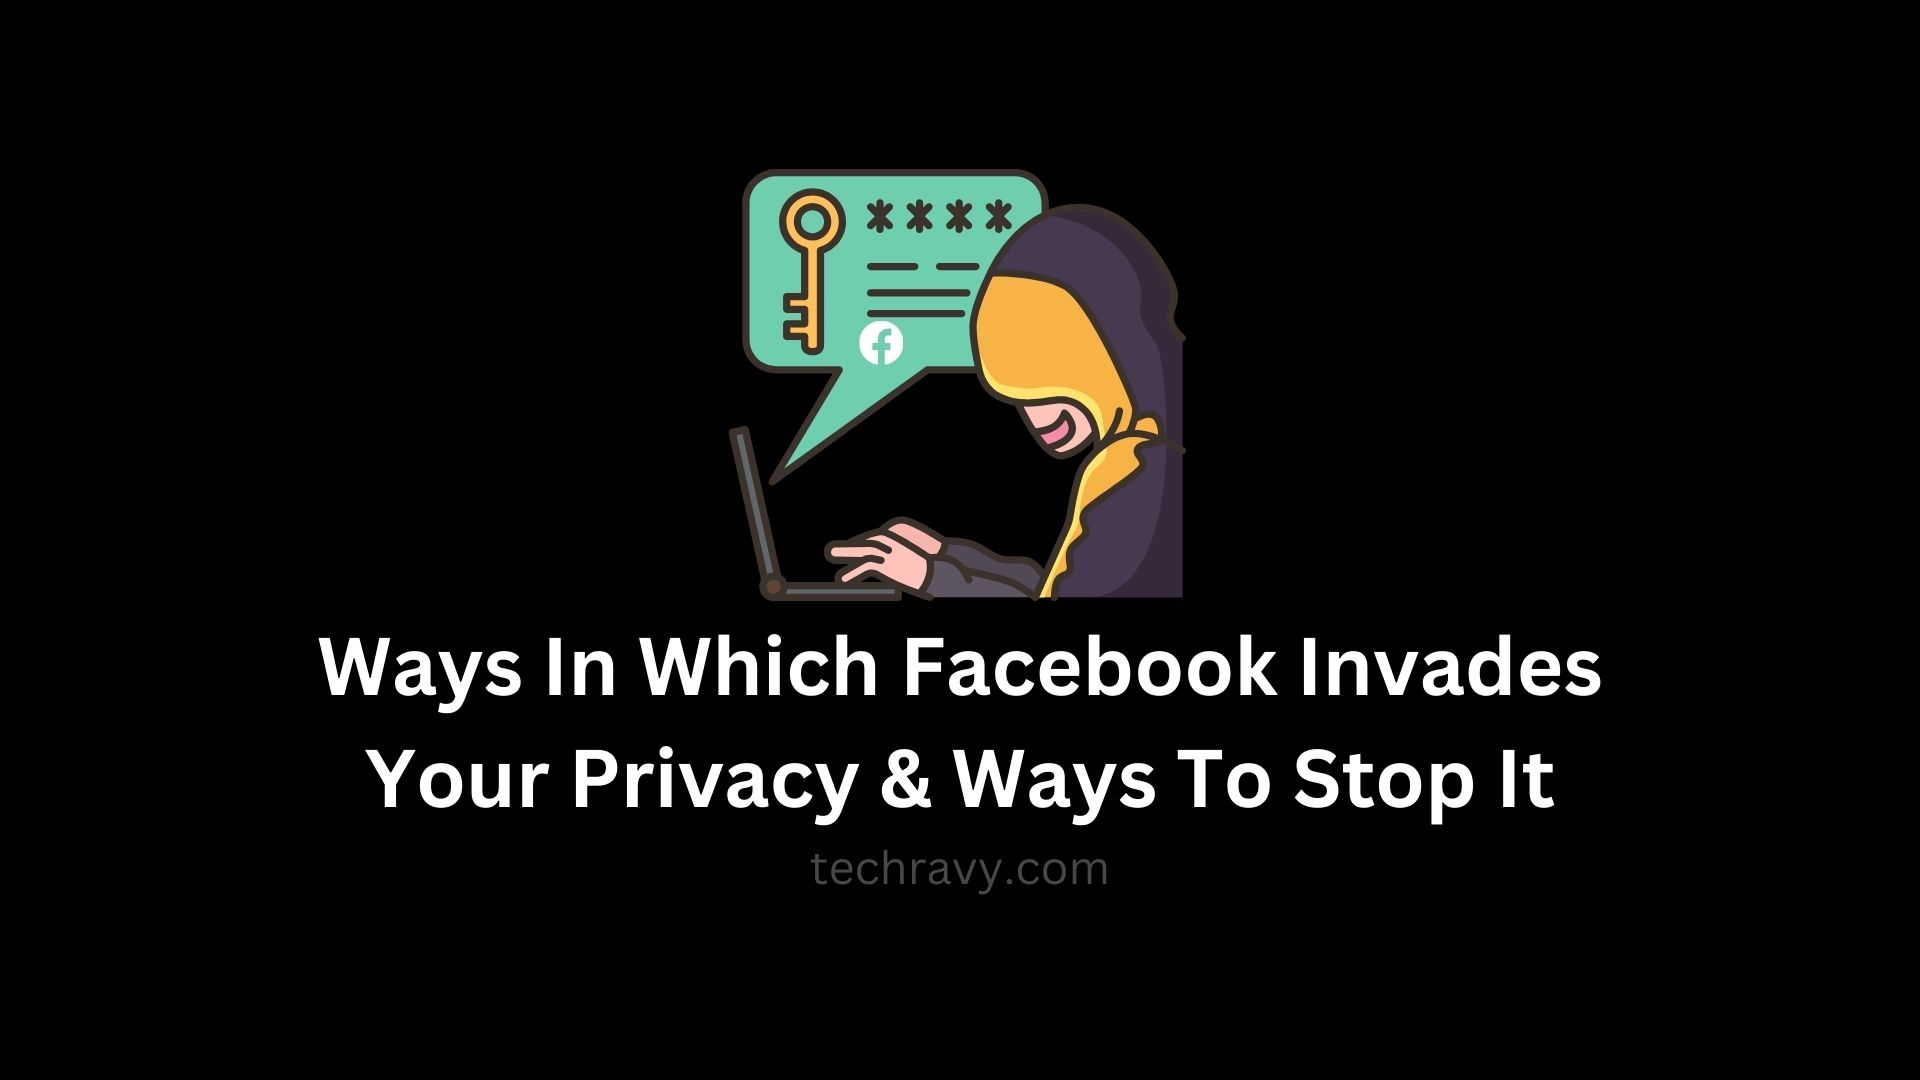 ways in which facebook invades privacy and ways to stop it